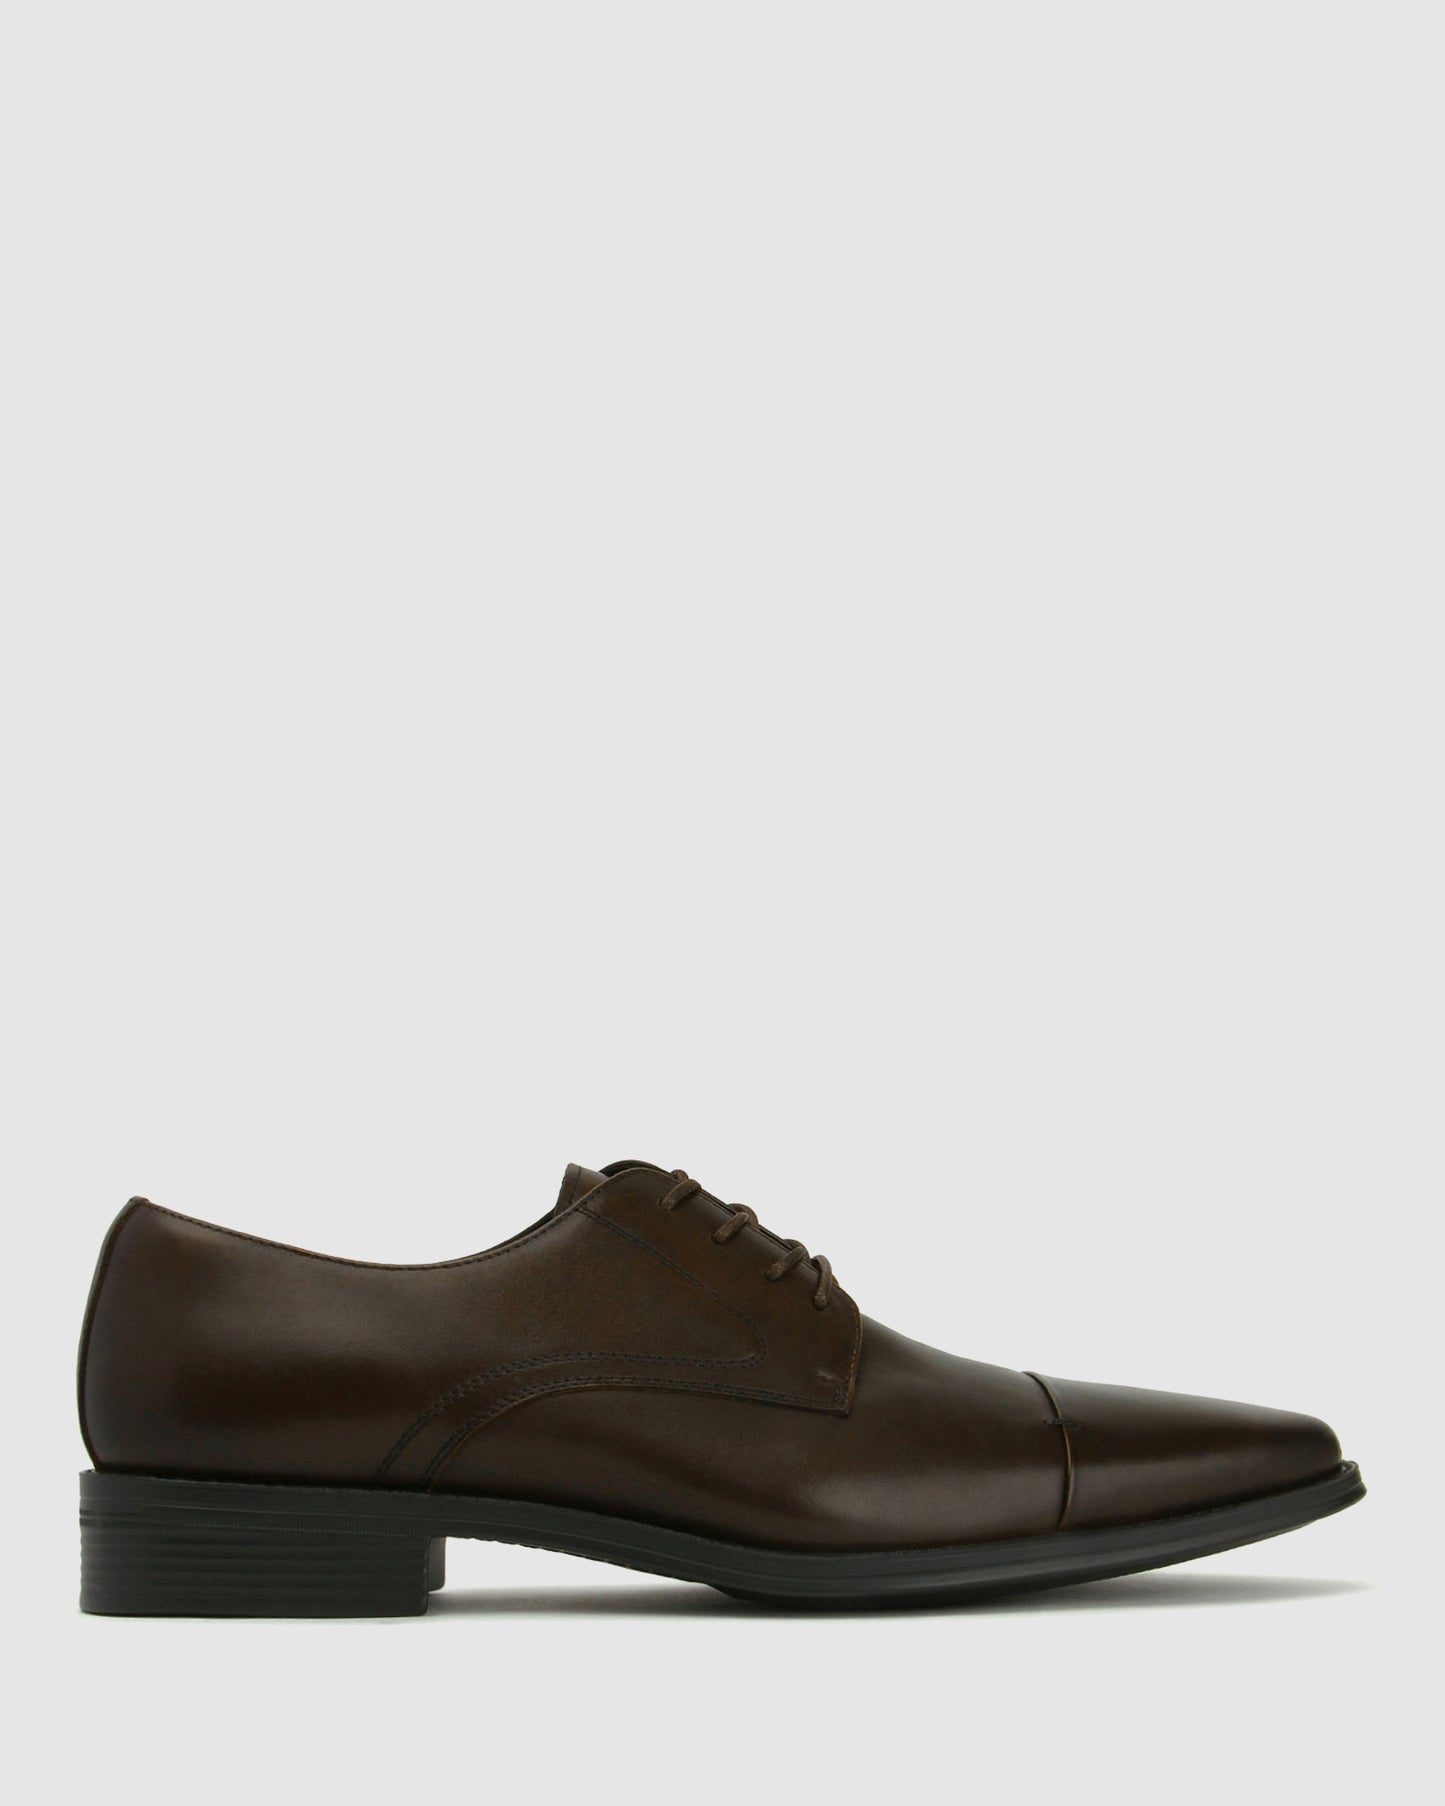 HANGER Leather Dress Shoes